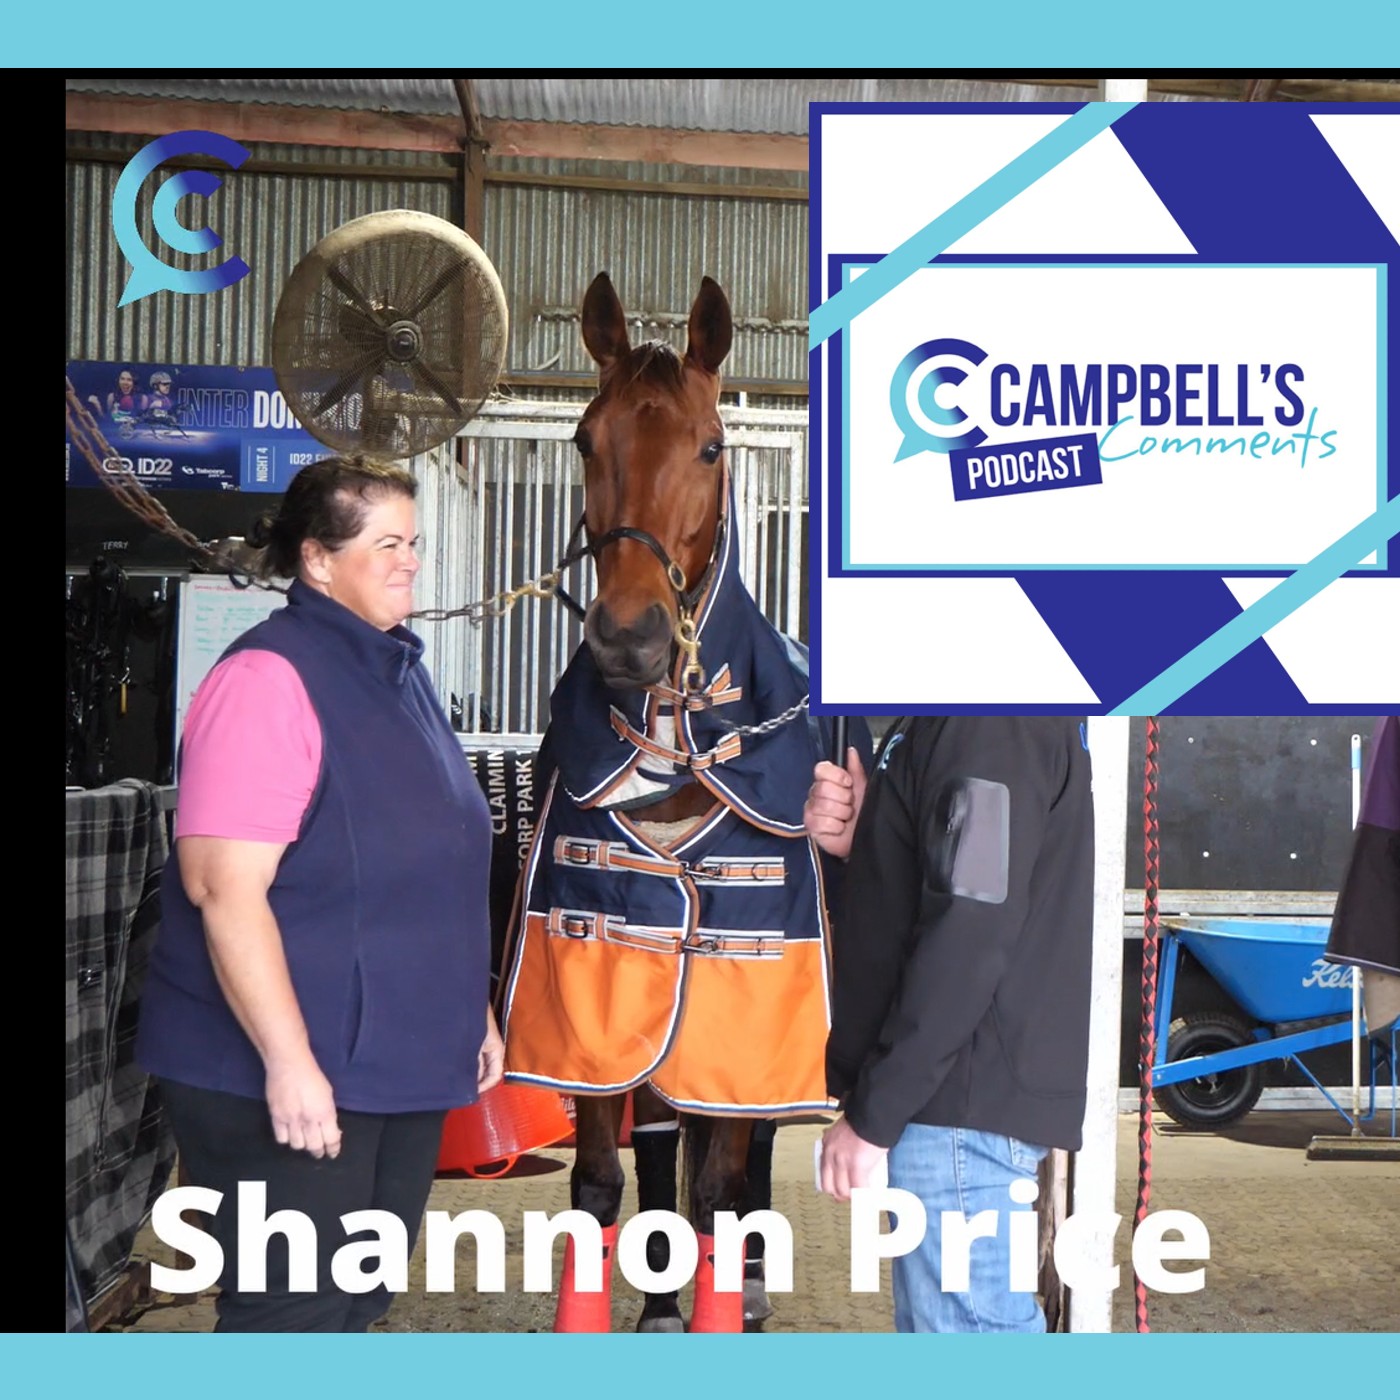 You are currently viewing 260: Campbells Comments with Shannon Price